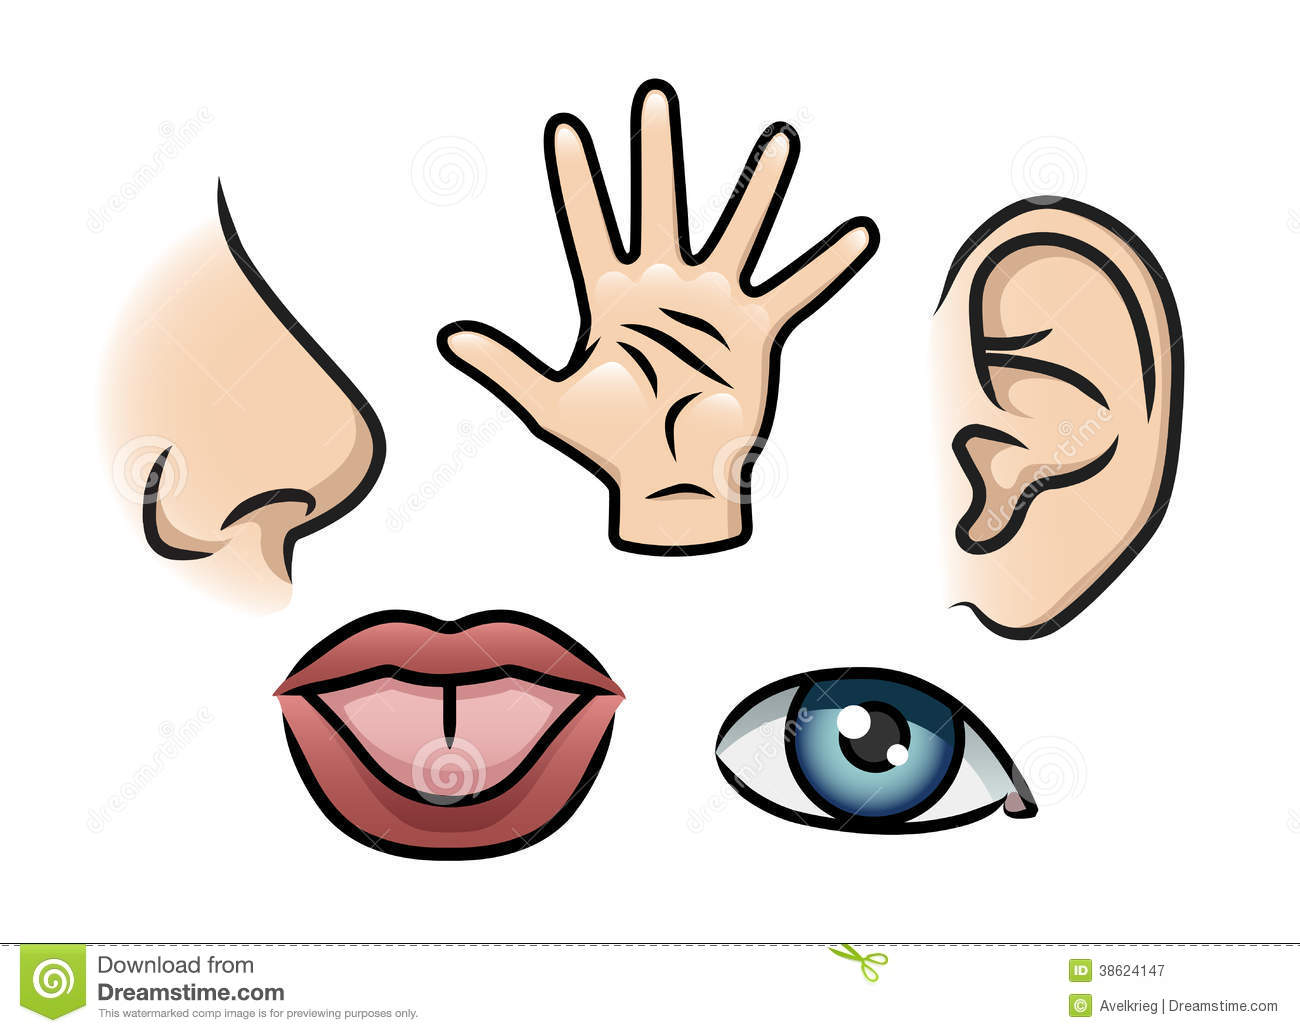 Cartoon Illustration Depicting The 5 Senses  Smell Touch Hearing